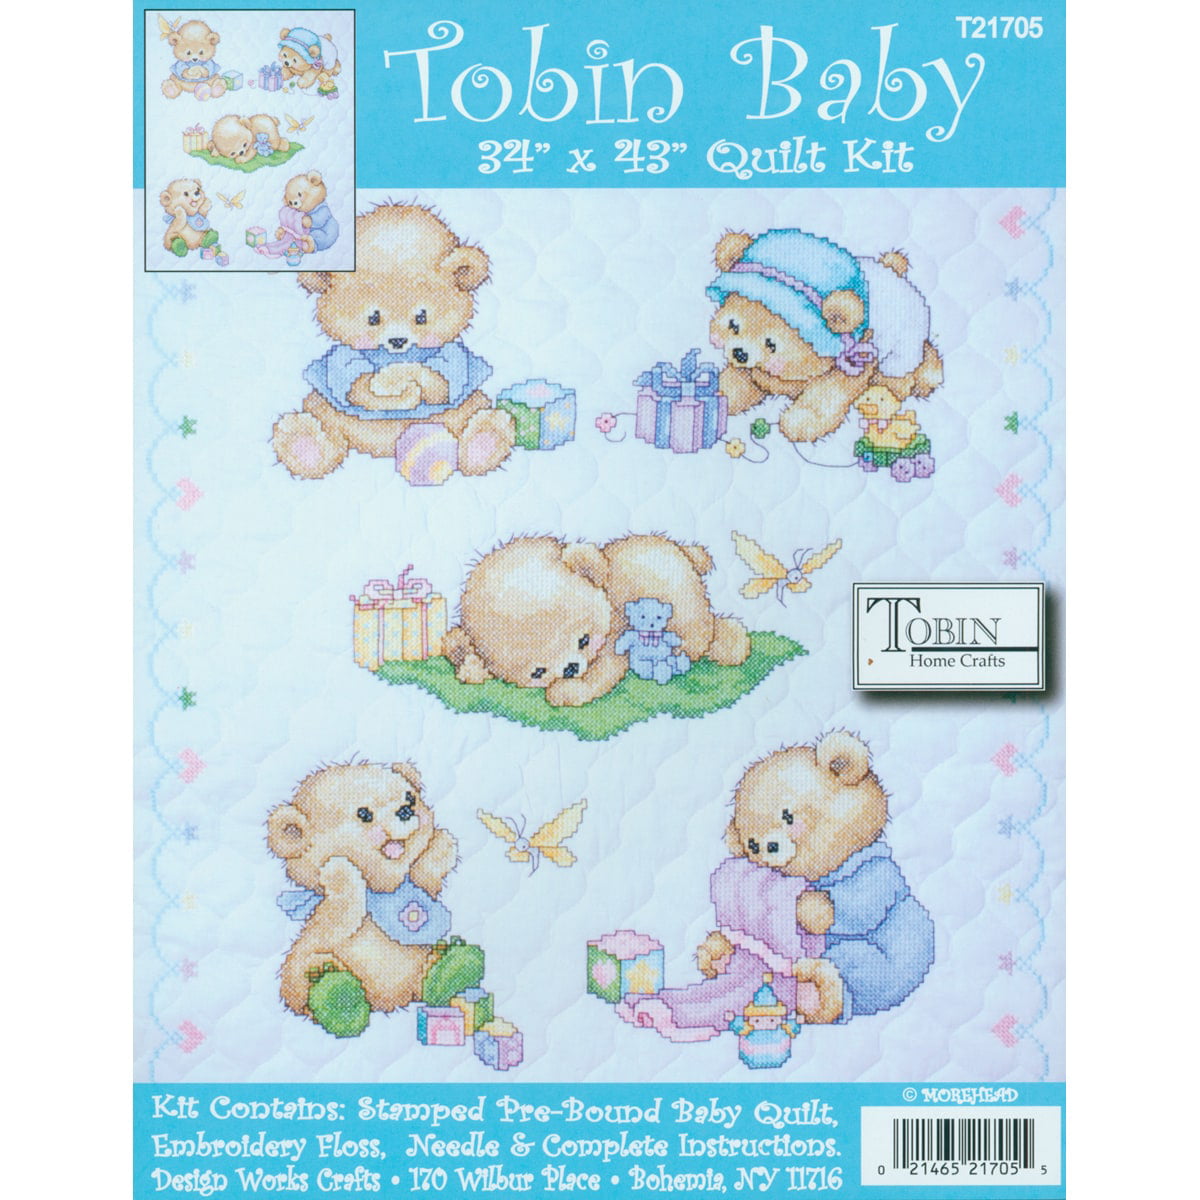 Tobin Bedtime Prayer Girl Baby Quilt Stamped Cross Stitch Kit T21709-36 by 43 inches with Gift Card 